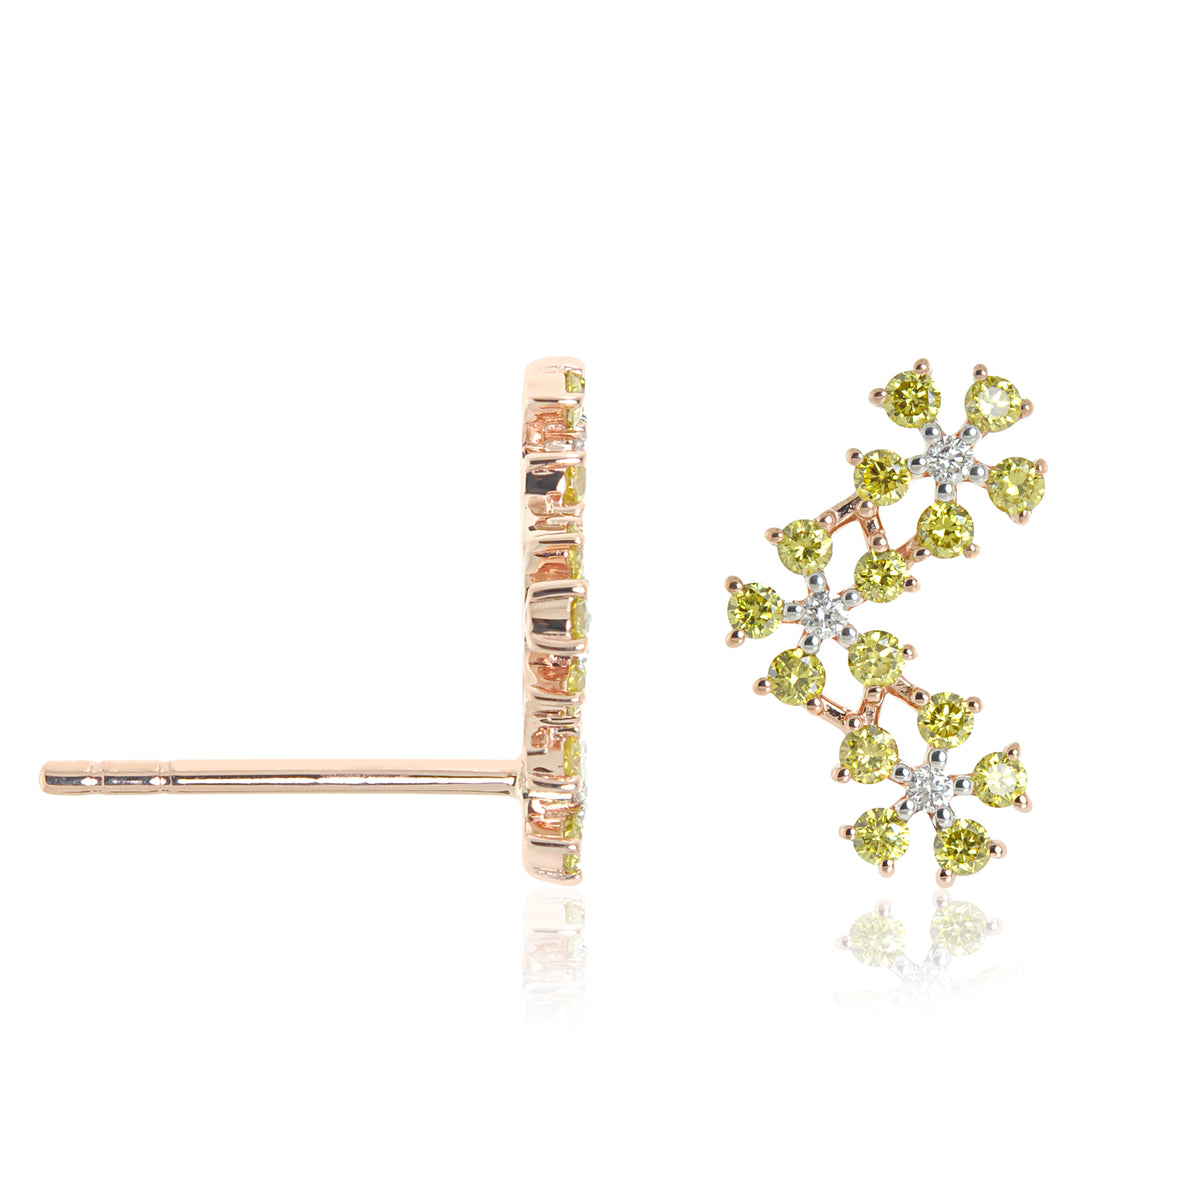 The Blooms 14K Gemstone Climber, Right